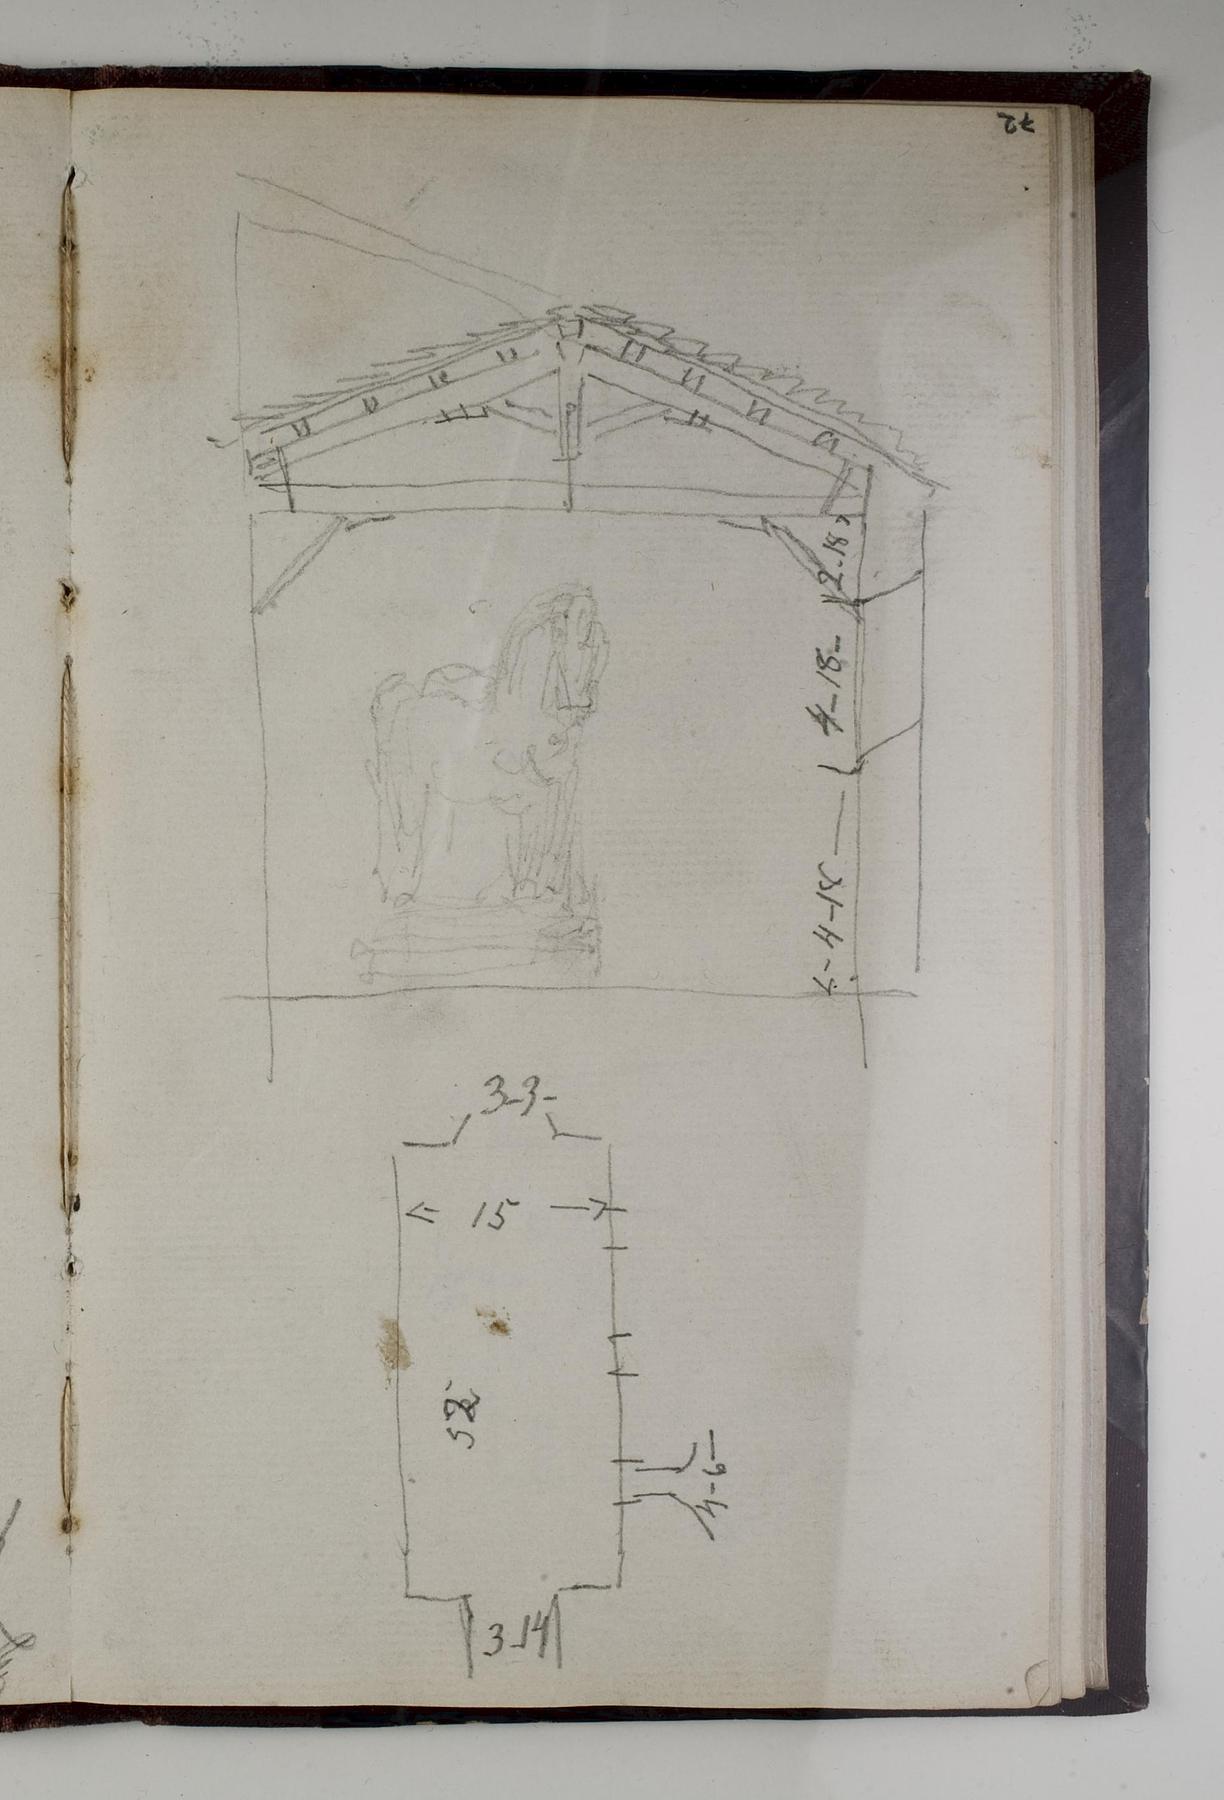 Survey of Thorvaldsen's Large Studio in Rome, Plan and Section, D1778,72